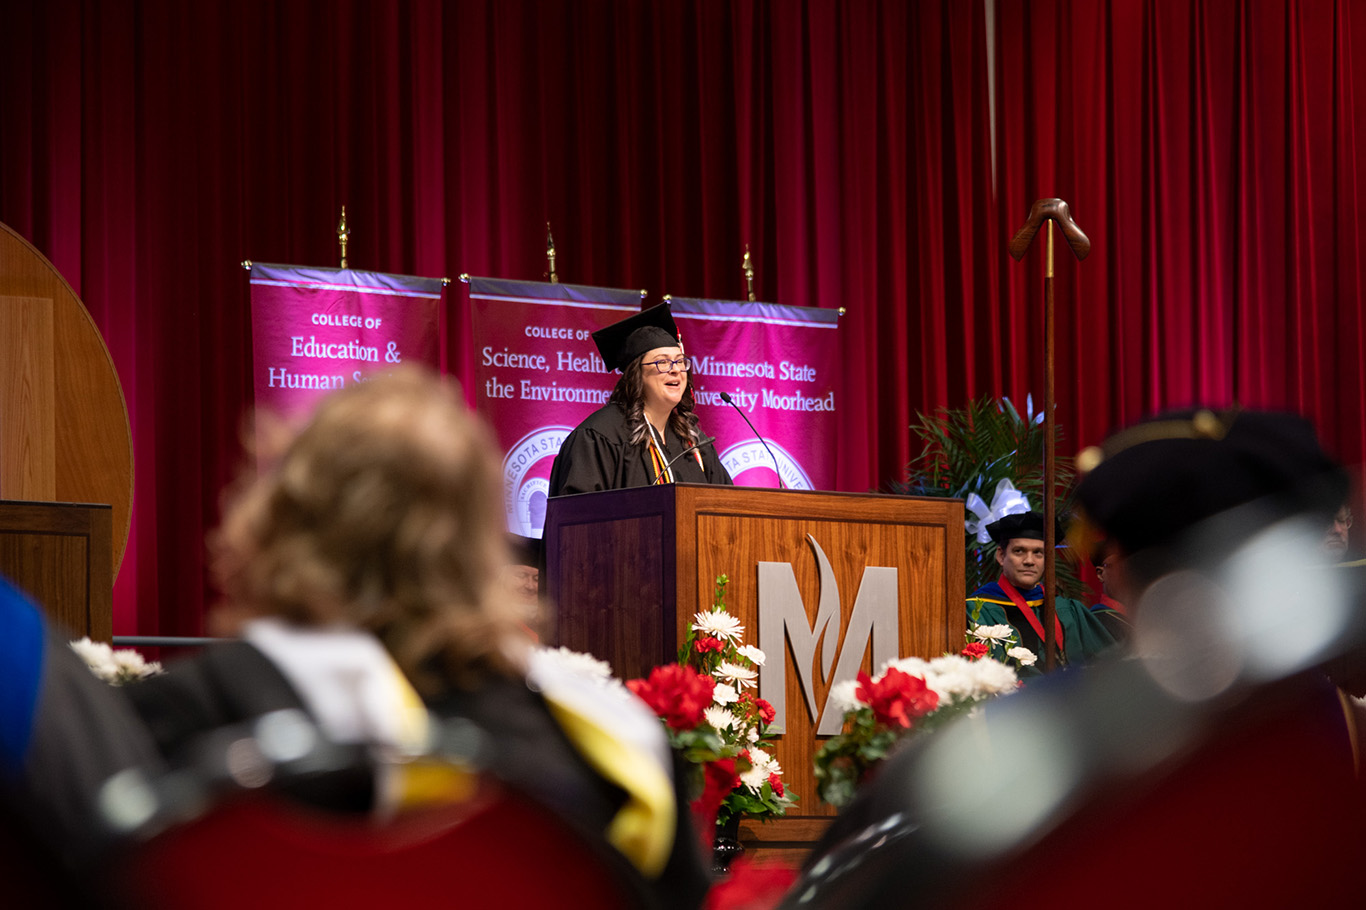 MSUM will celebrate commencement as planned at 1 p.m. today